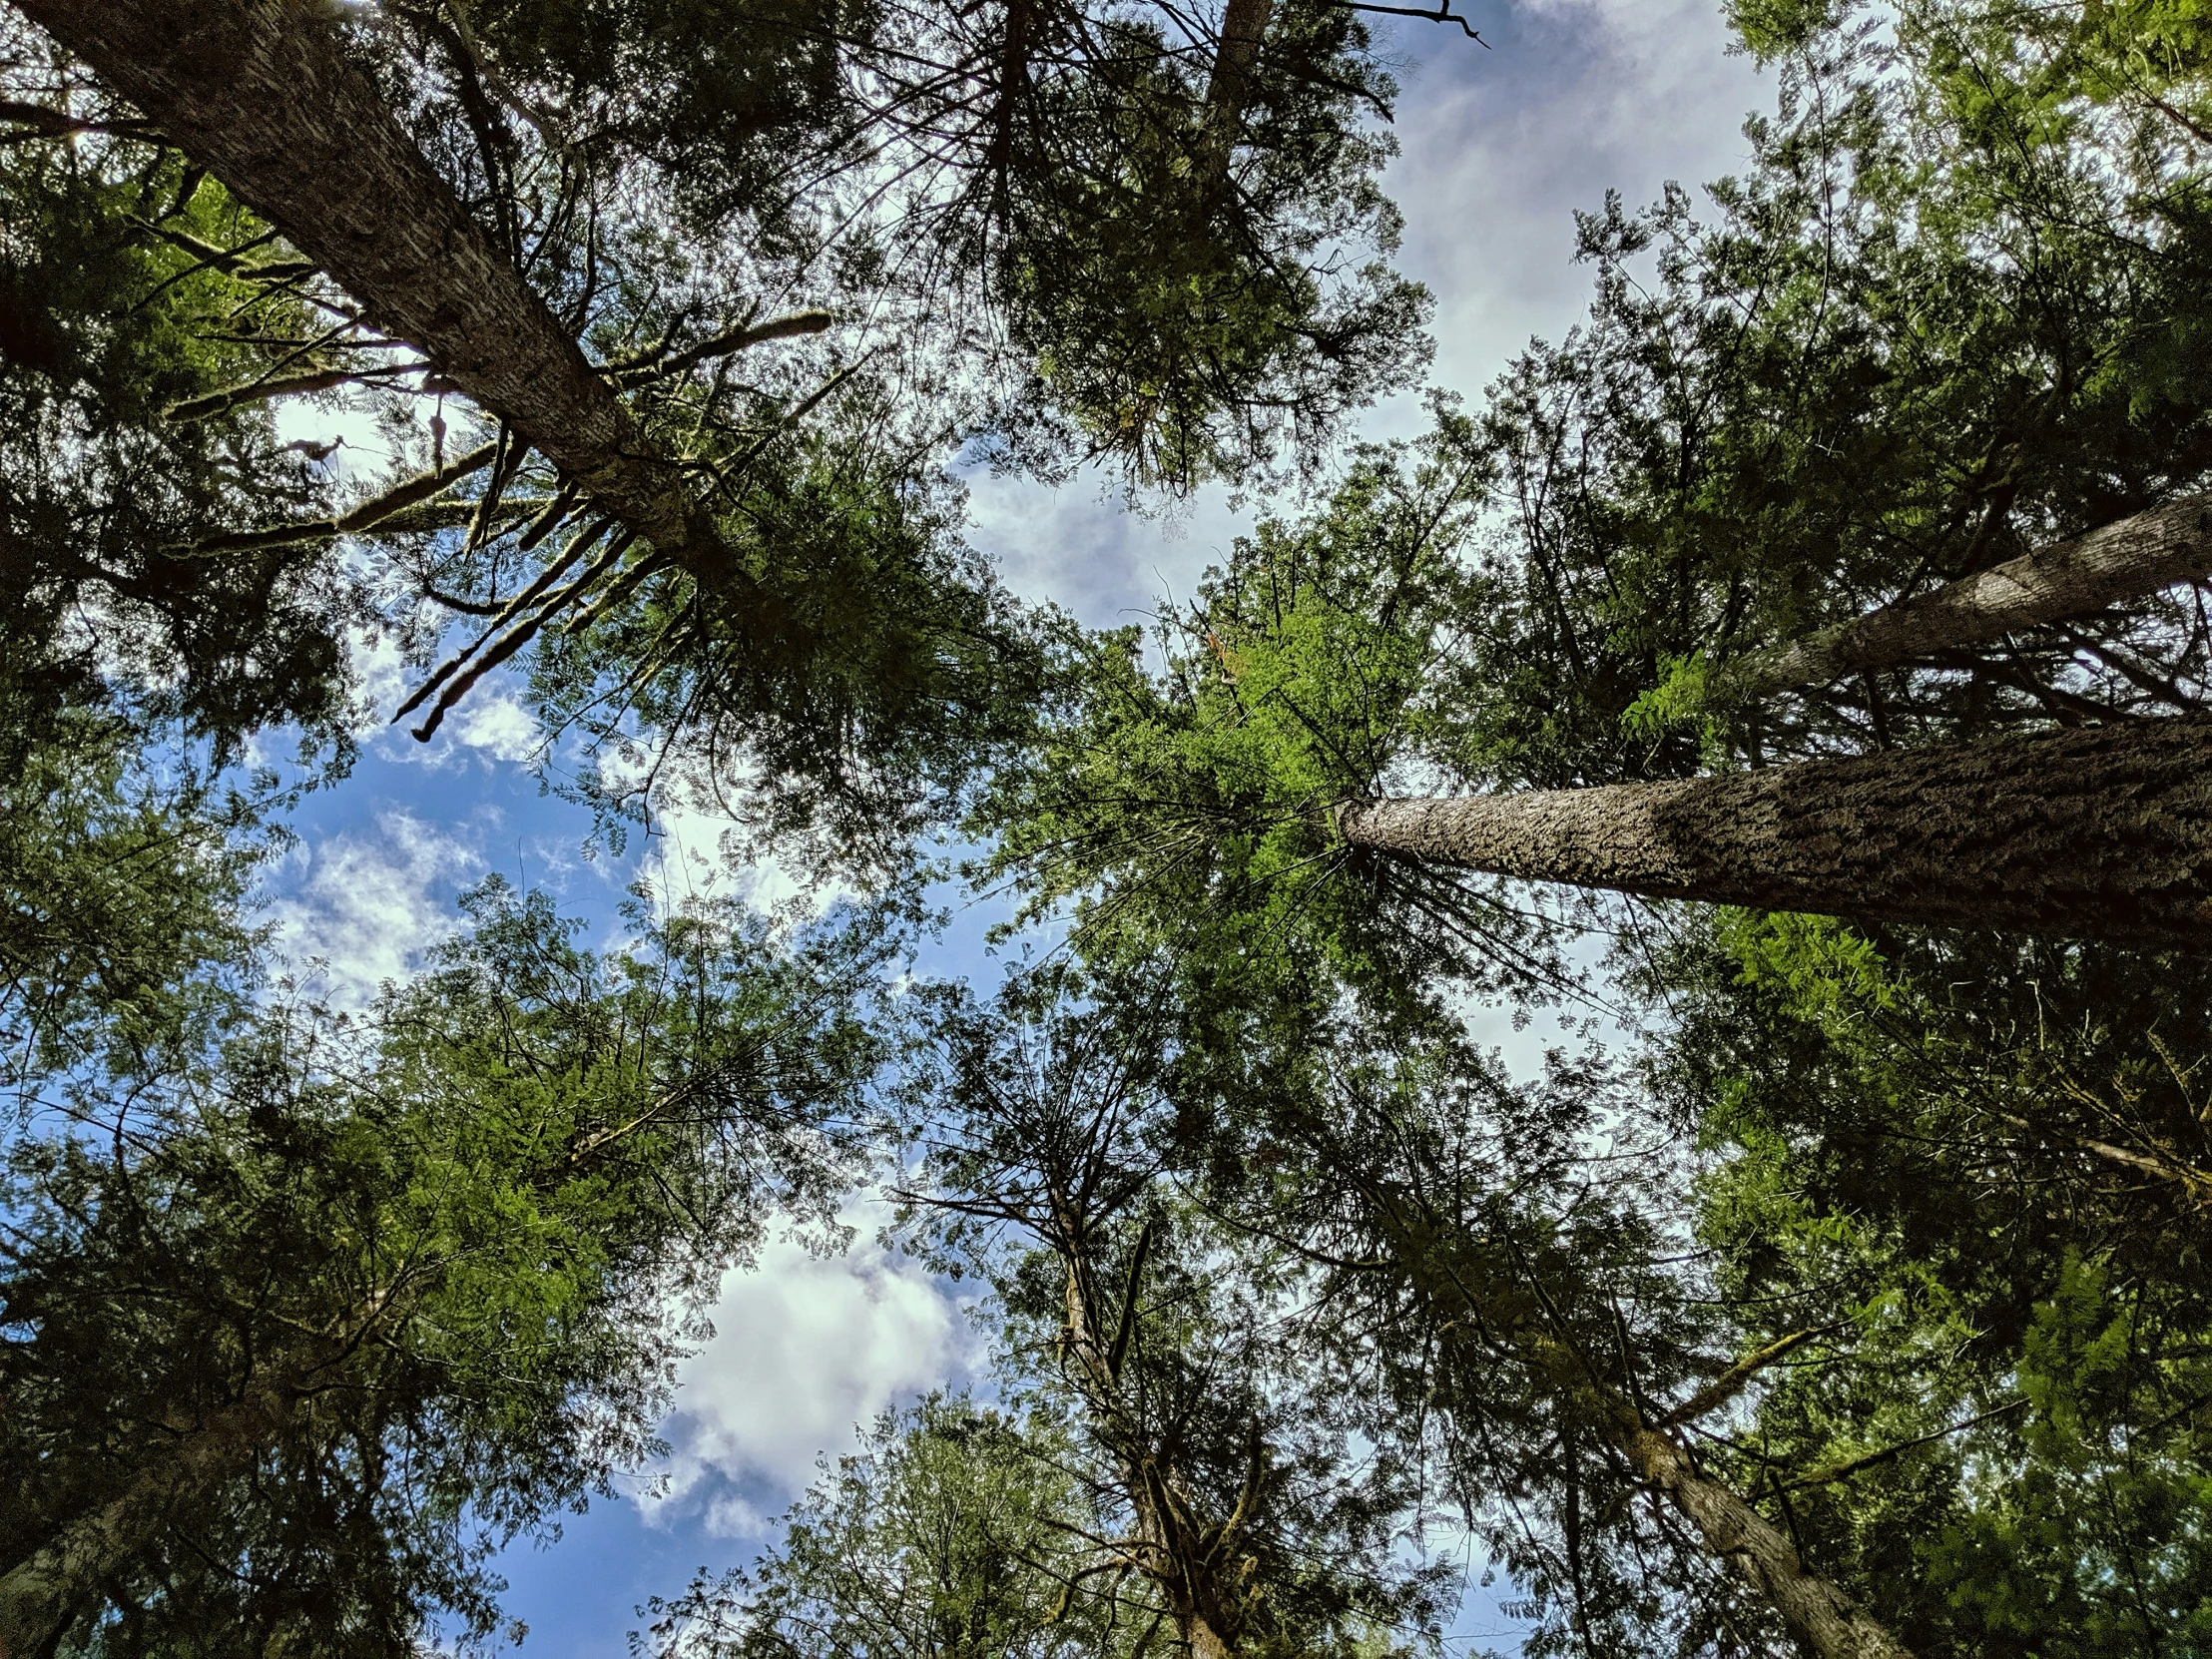 a view of trees from below looking up into the sky